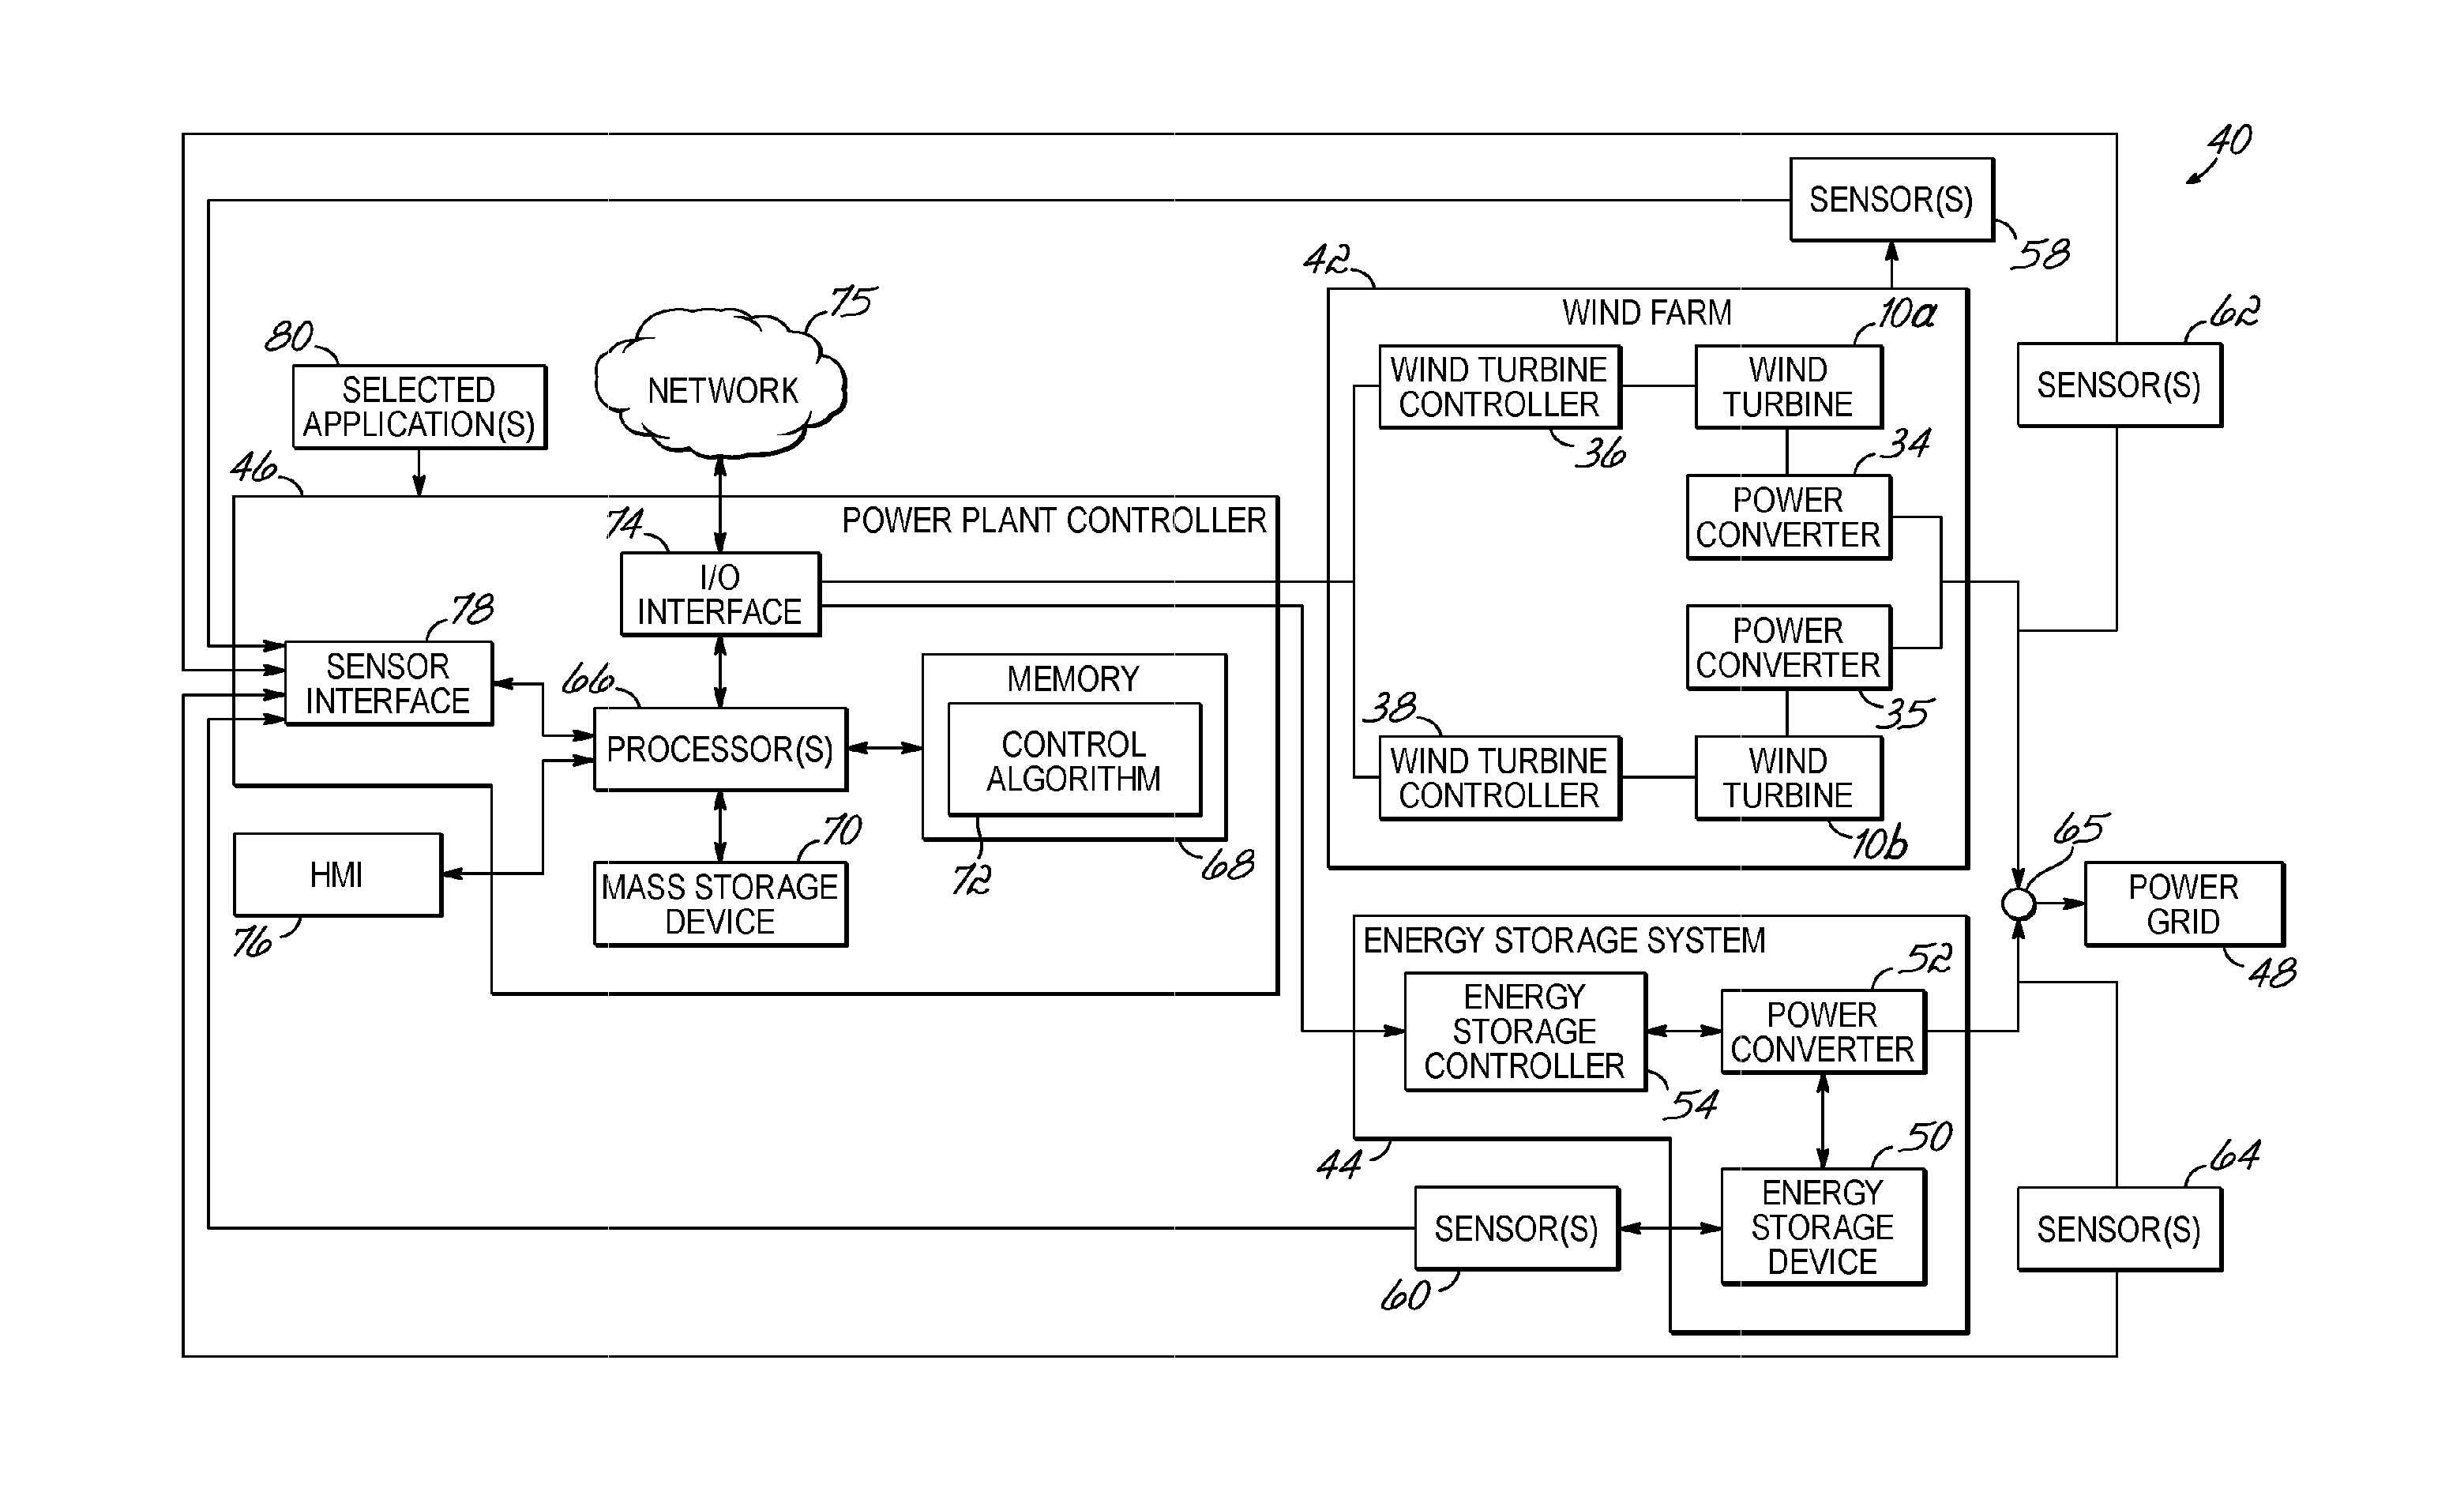 Power plant & energy storage system for provision of grid ancillary services